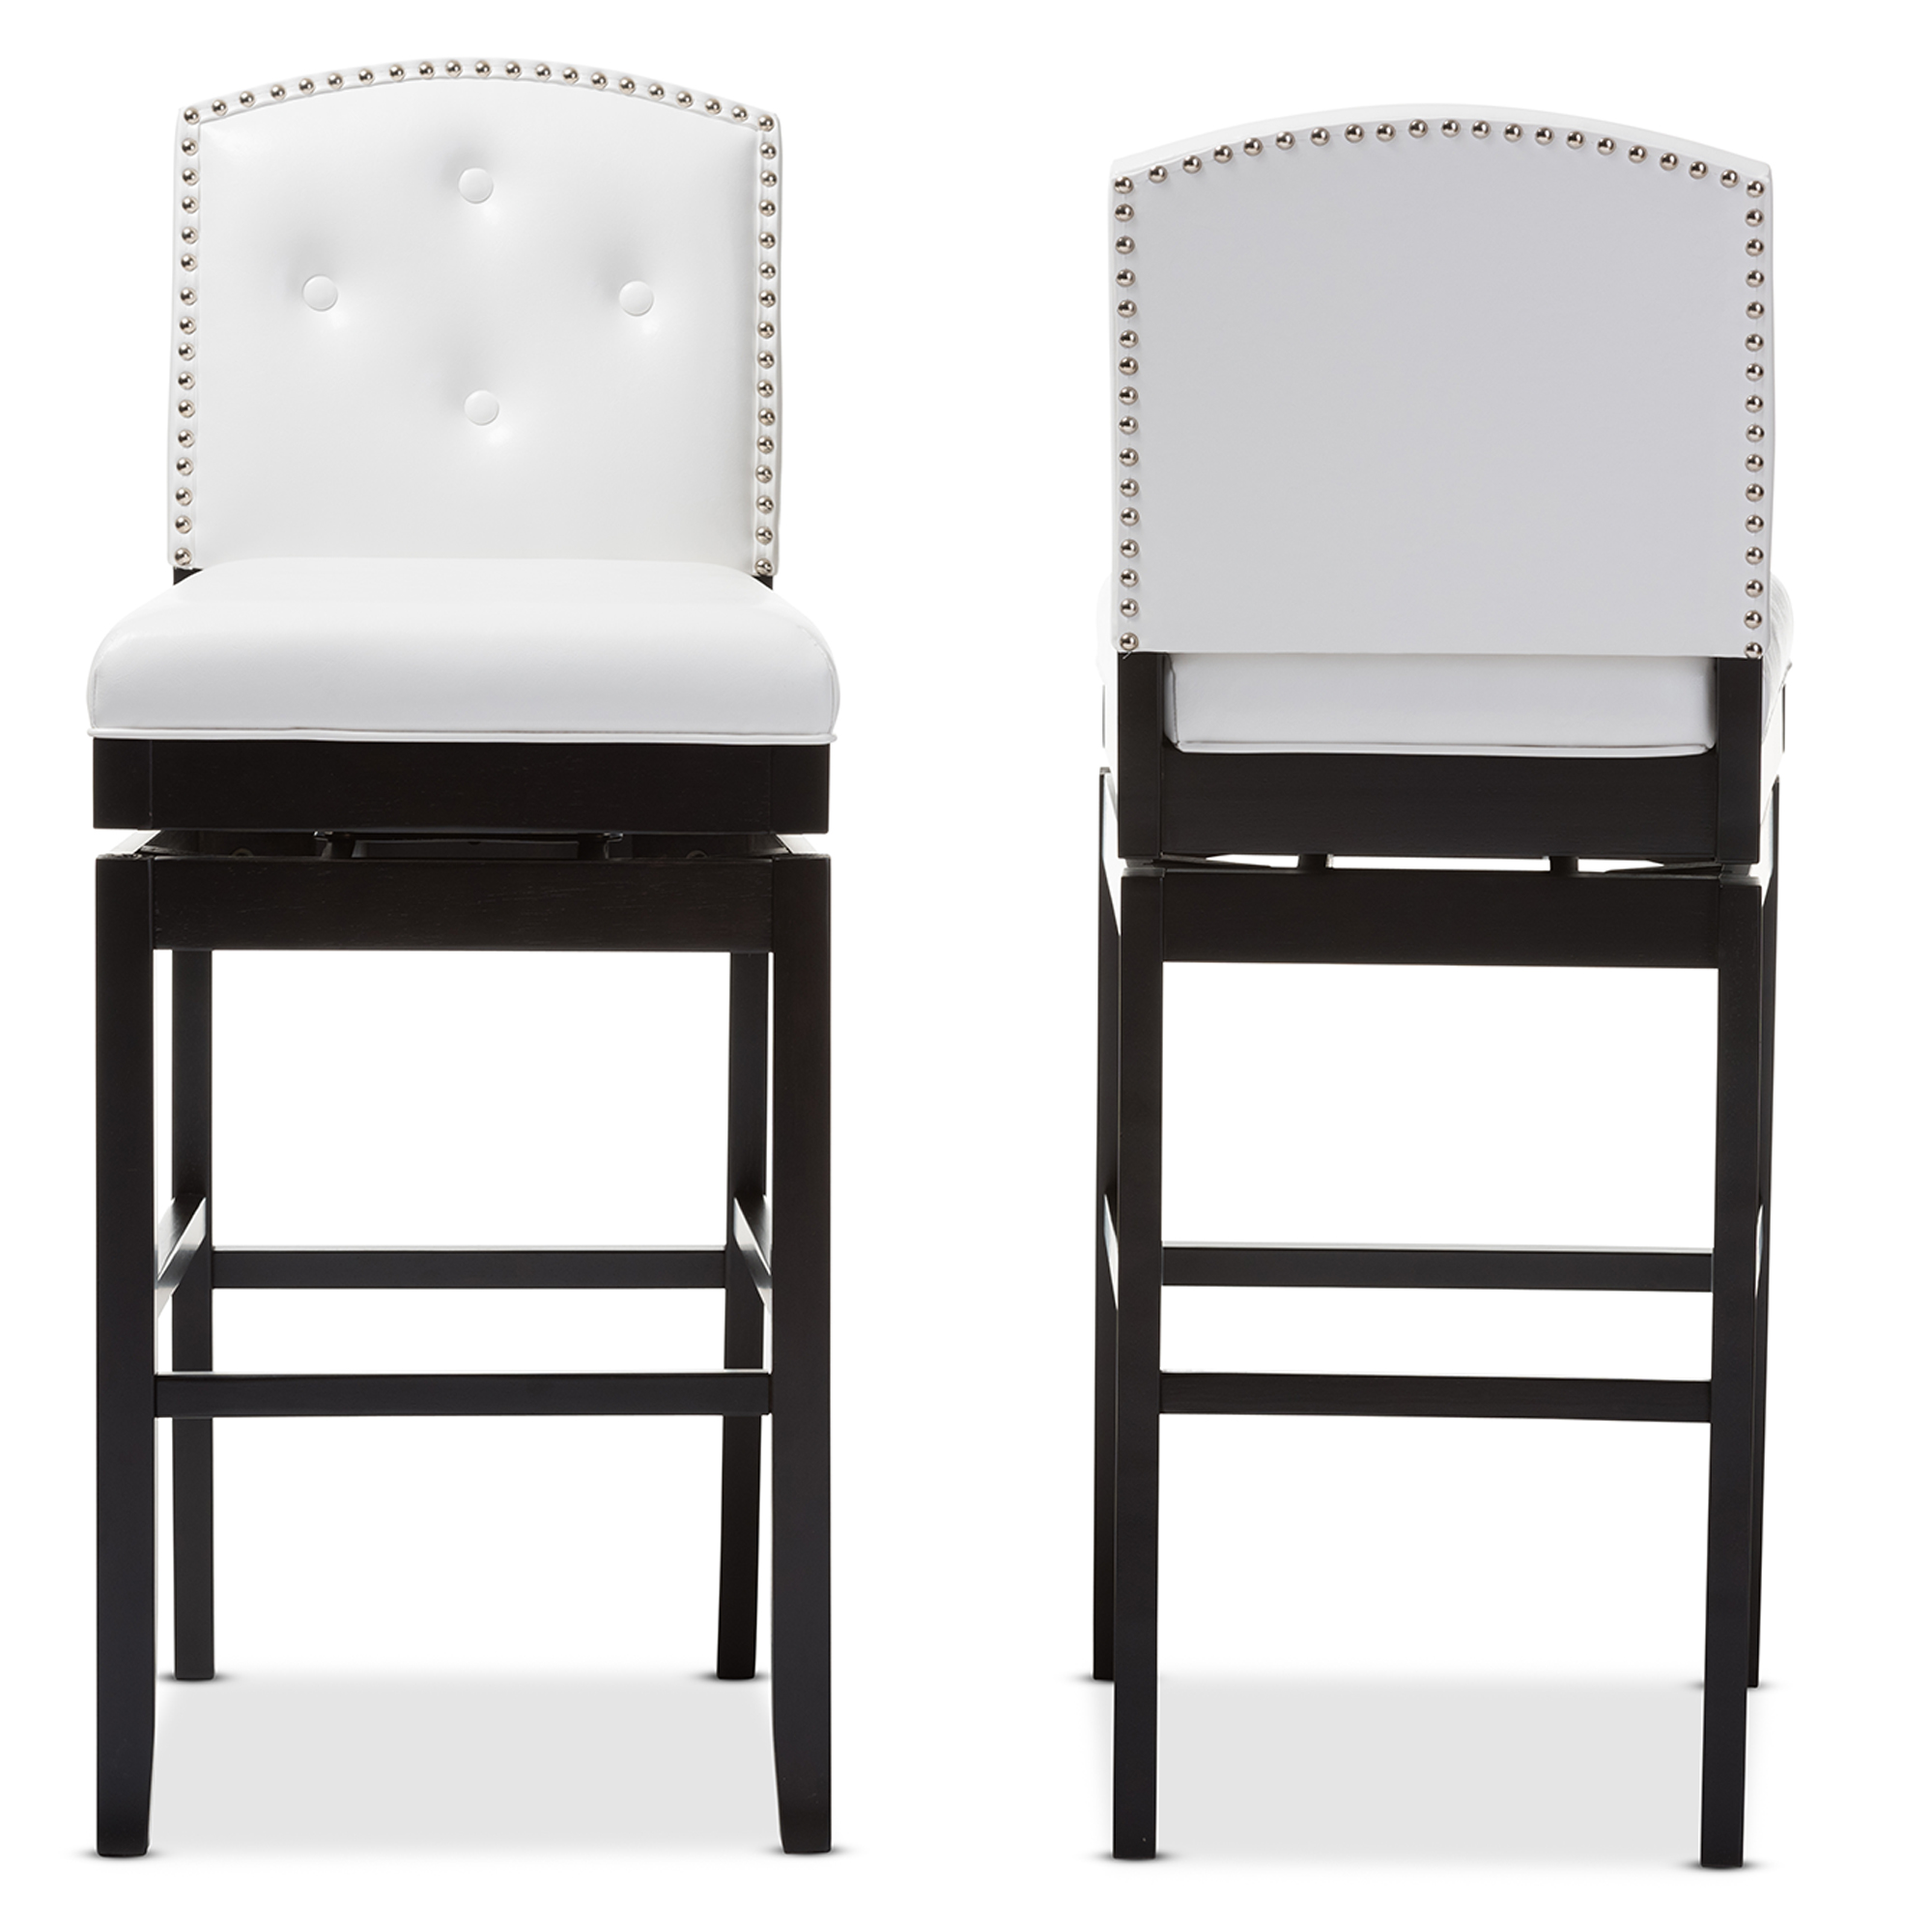 Baxton Studio Ginaro Modern and Contemporary White Faux Leather Button-tufted Upholstered Swivel Bar Stool